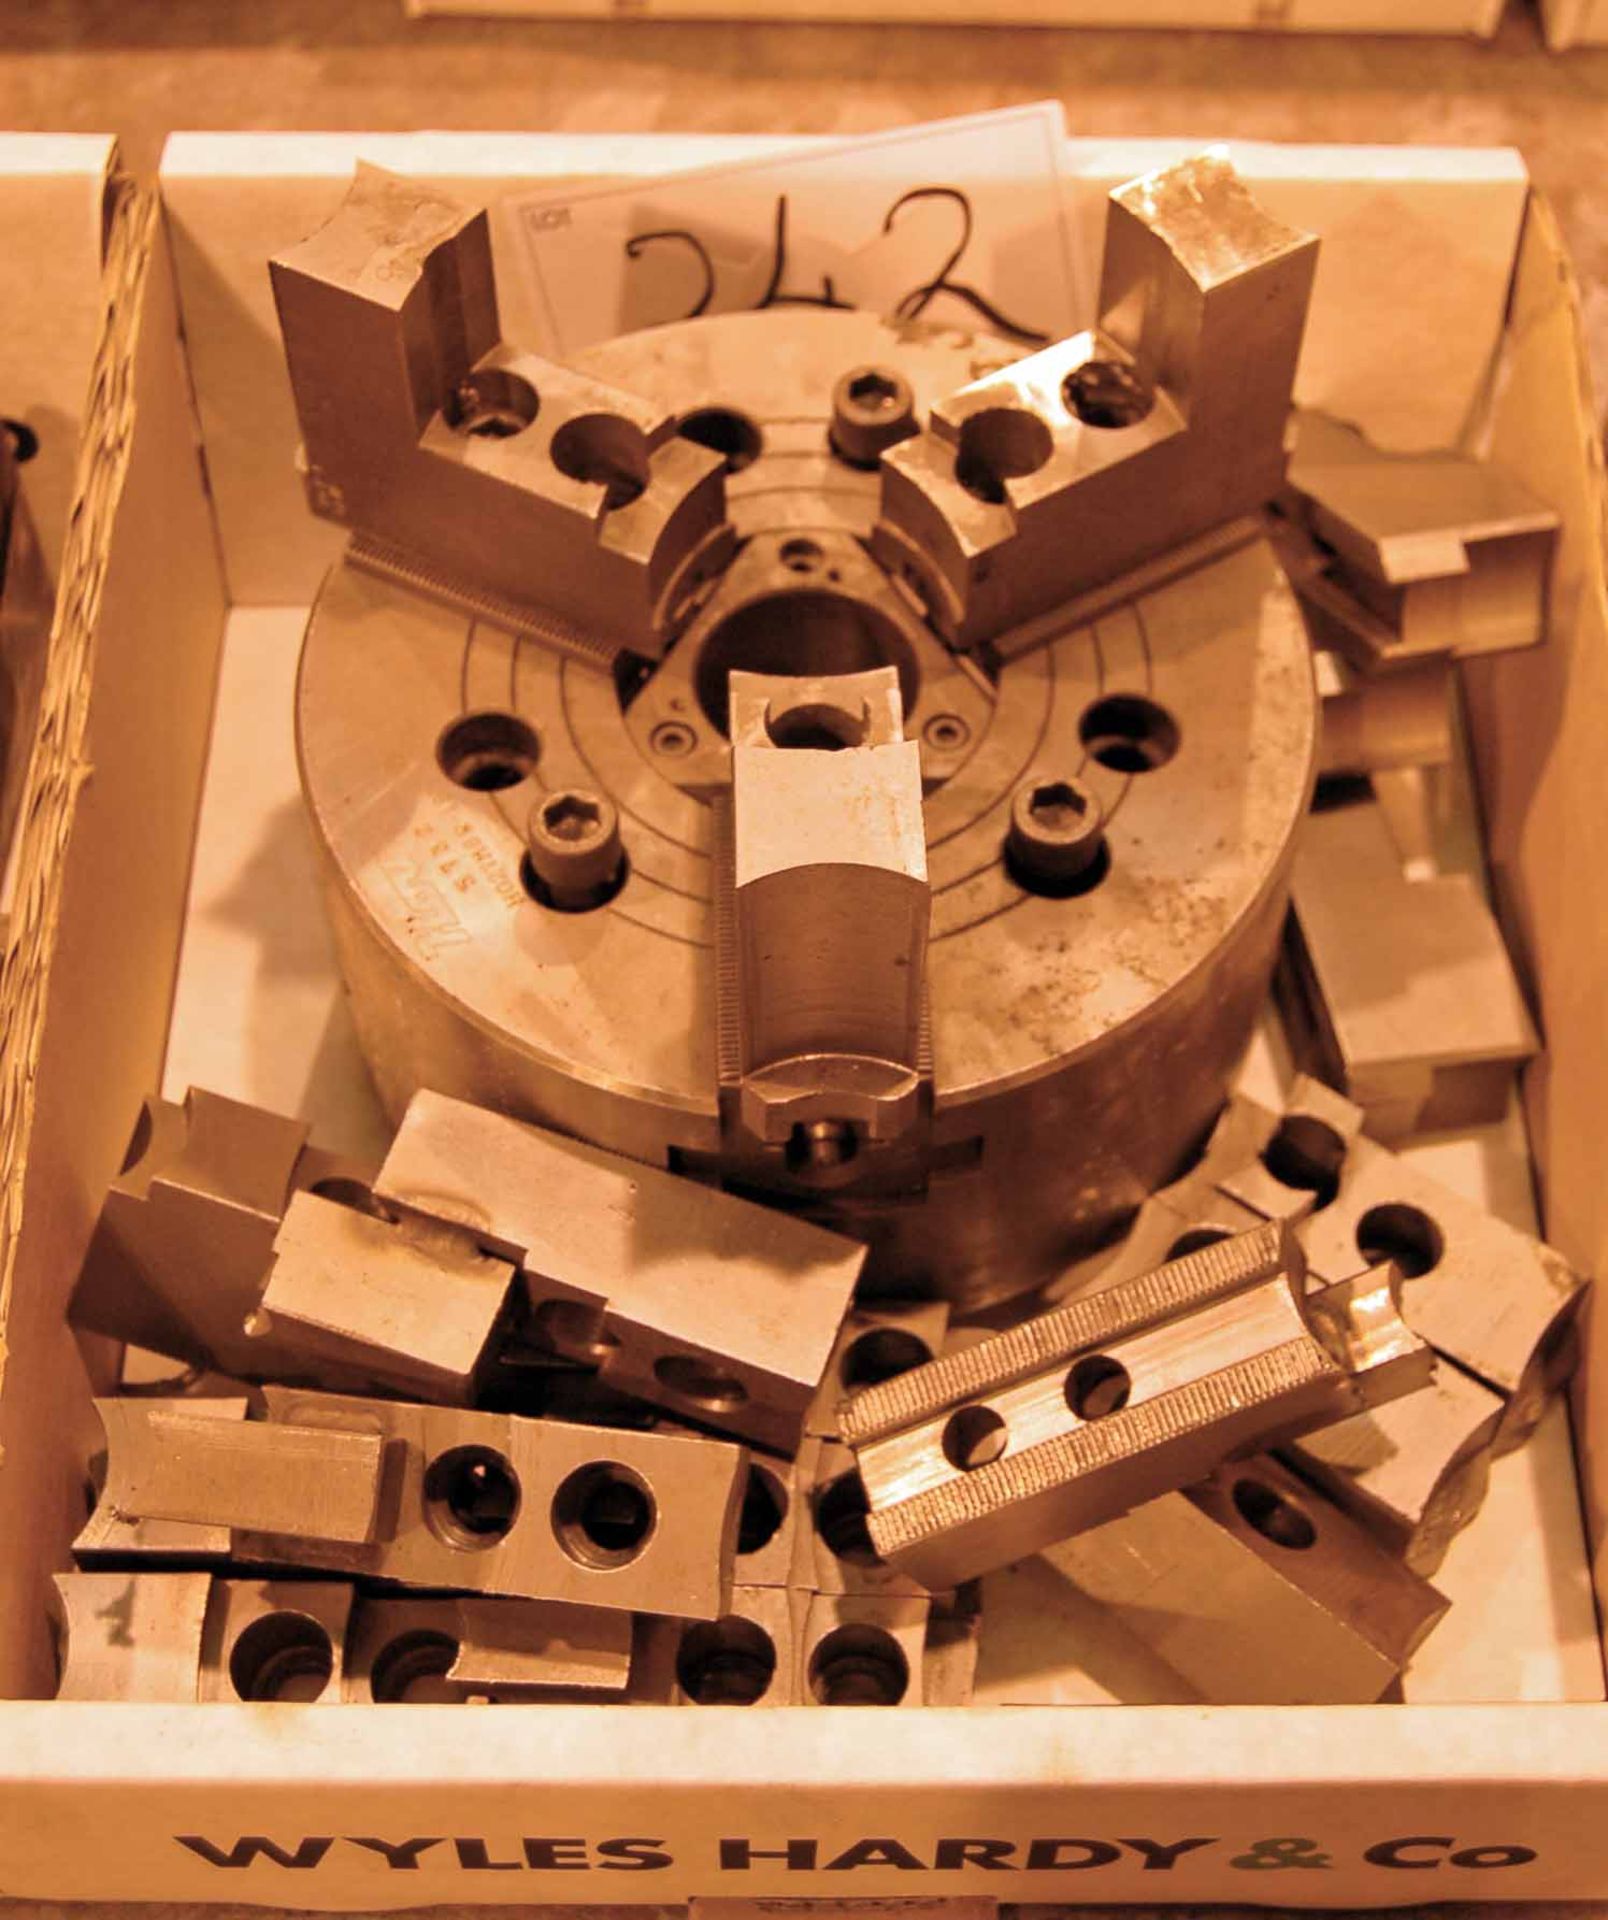 An 8 Inch 3 Jaw Chuck Vice and Various Jaws (As Photographed)